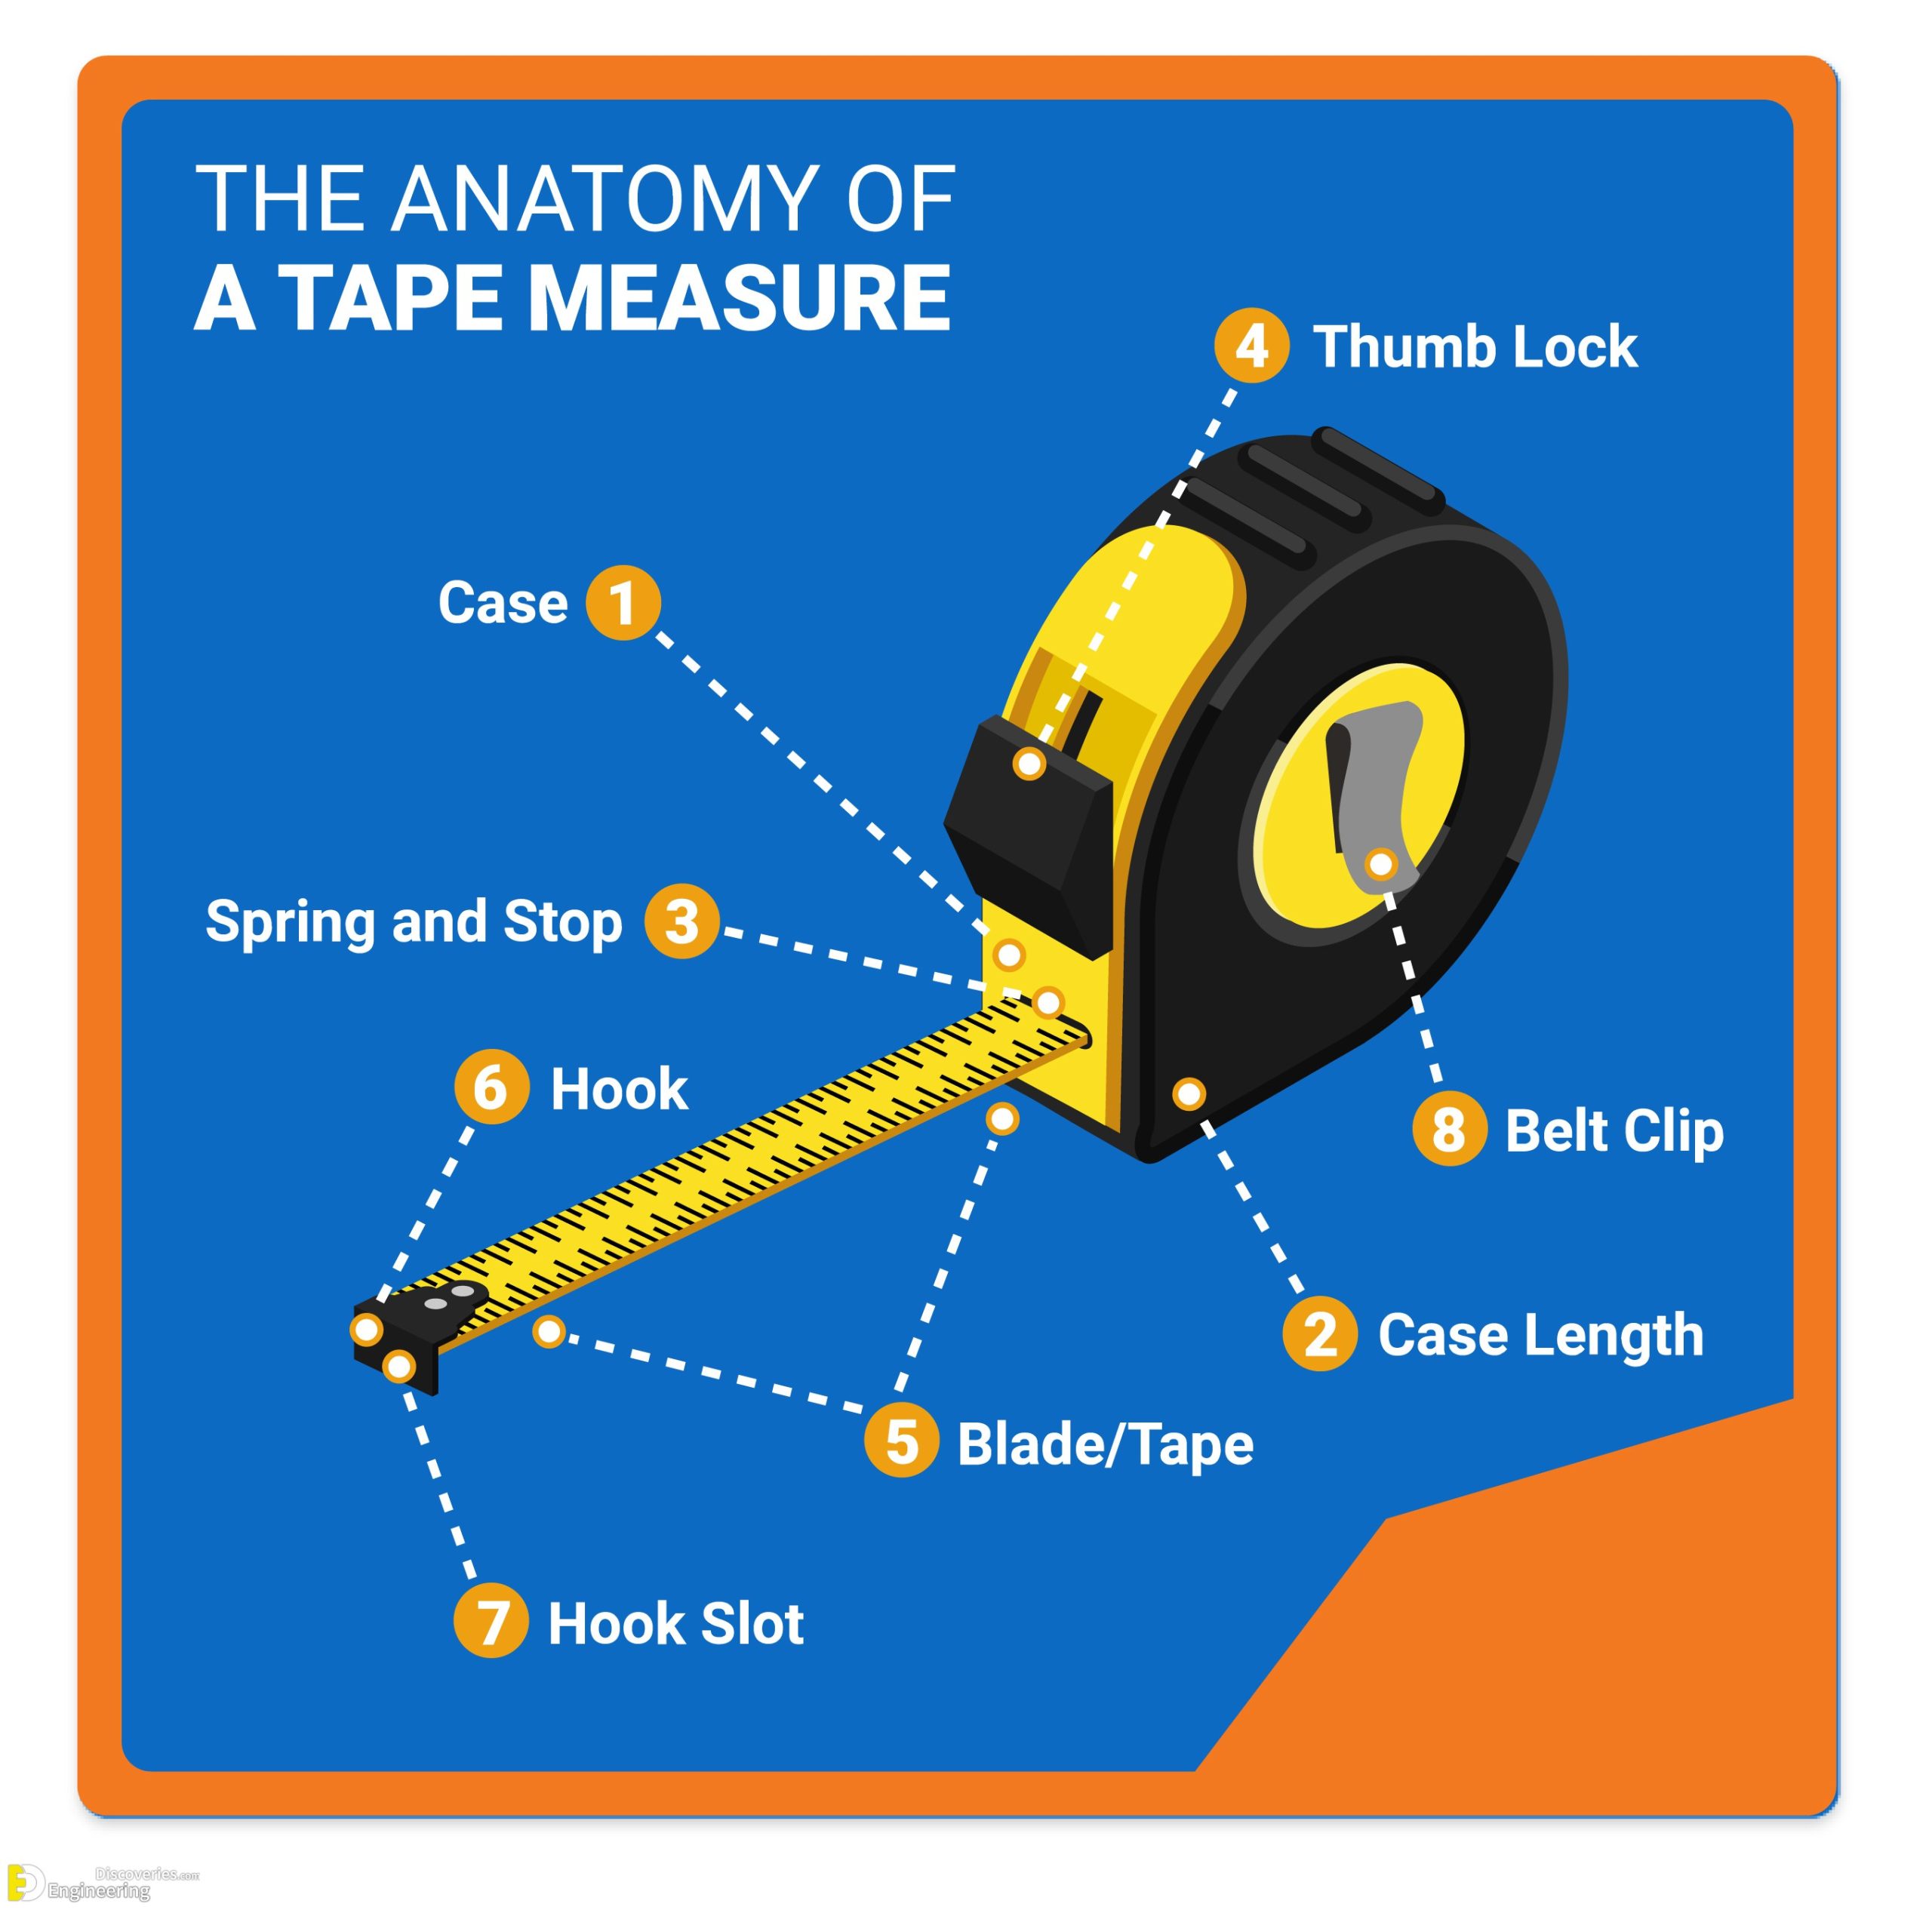 7 Mistakes You're Making When Using a Measuring Tape